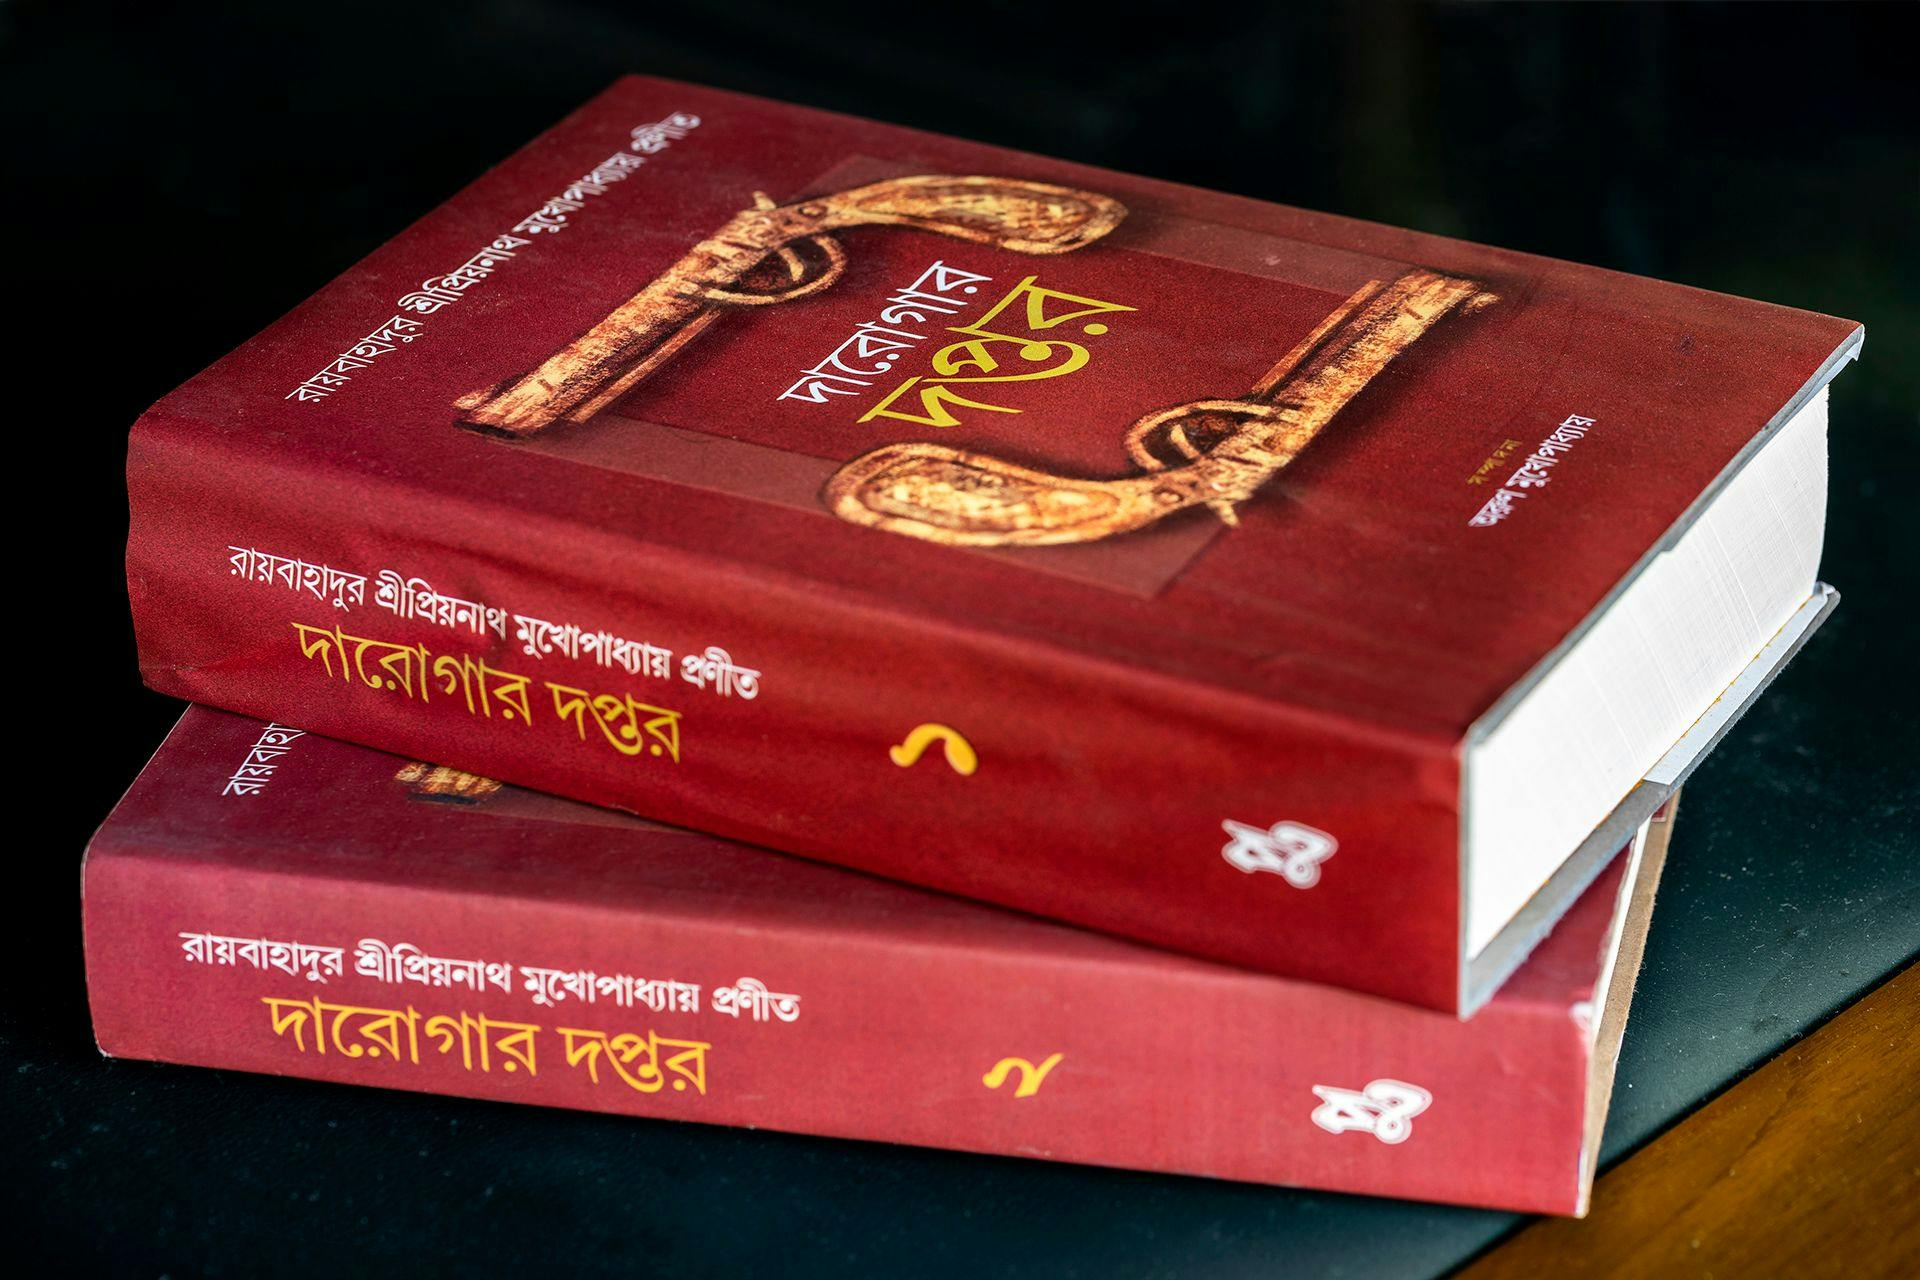 Darogar Daptar, now published in two volumes